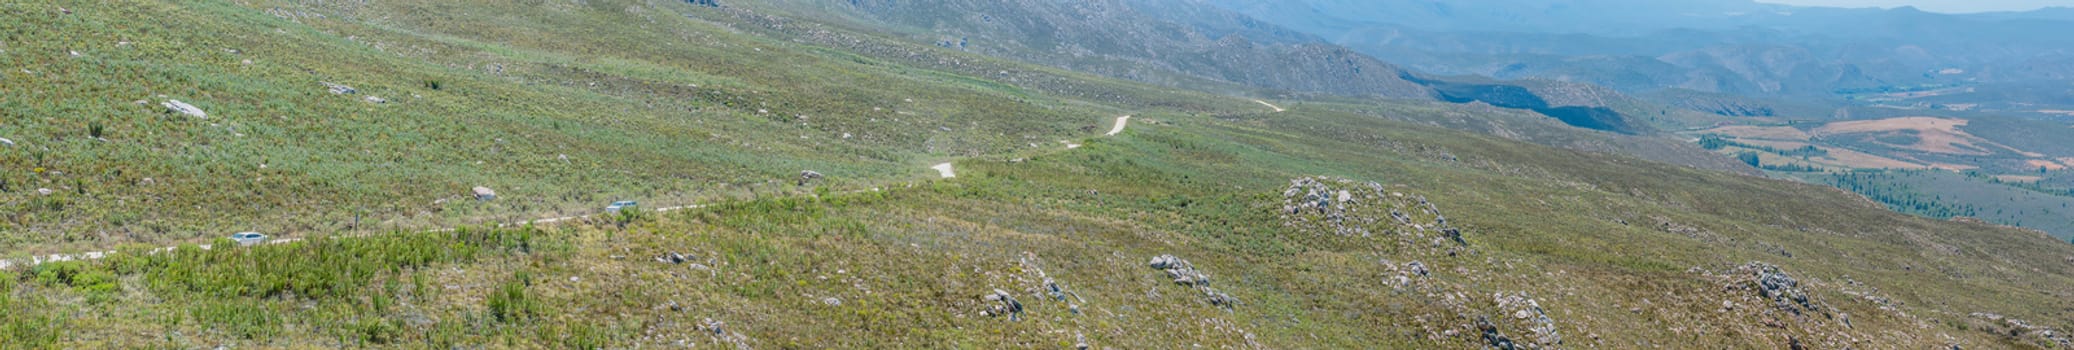 SWARTBERG PASS, SOUTH AFRICA - JANUARY 2, 2015: View from the Swartberg Pass between Oudtshoorn and Prince Albert towards Schoemansville and the Cango Caves